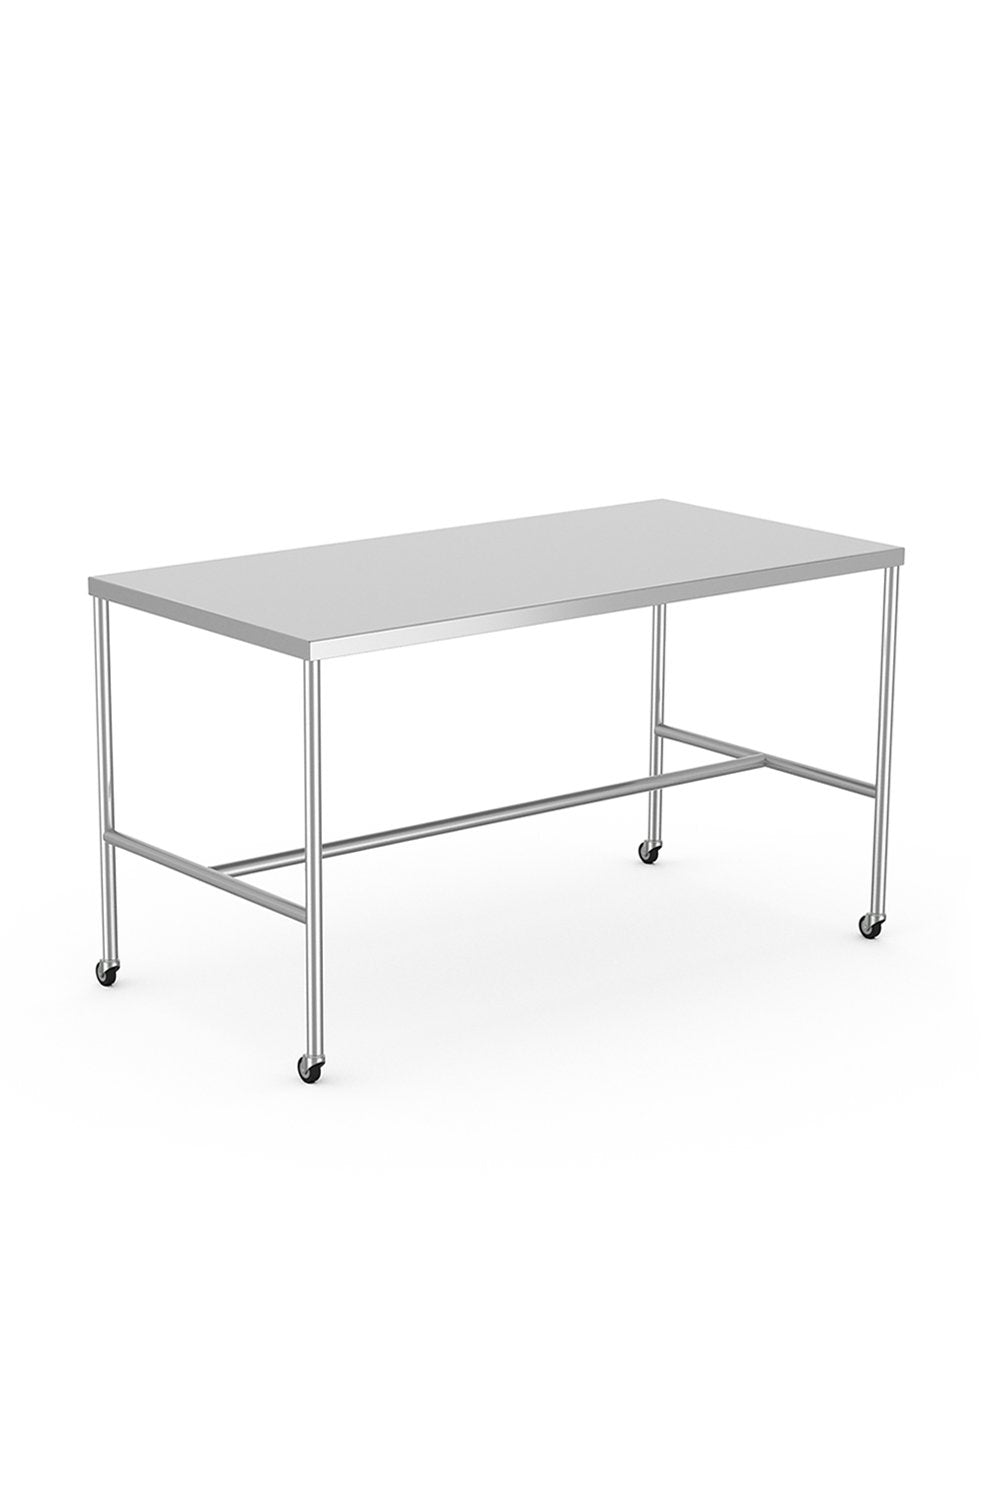 Stainless Steel Table Stainless Solutions Macmedical 72"D x 36"W x 36"H H-Brace, 5" whls 